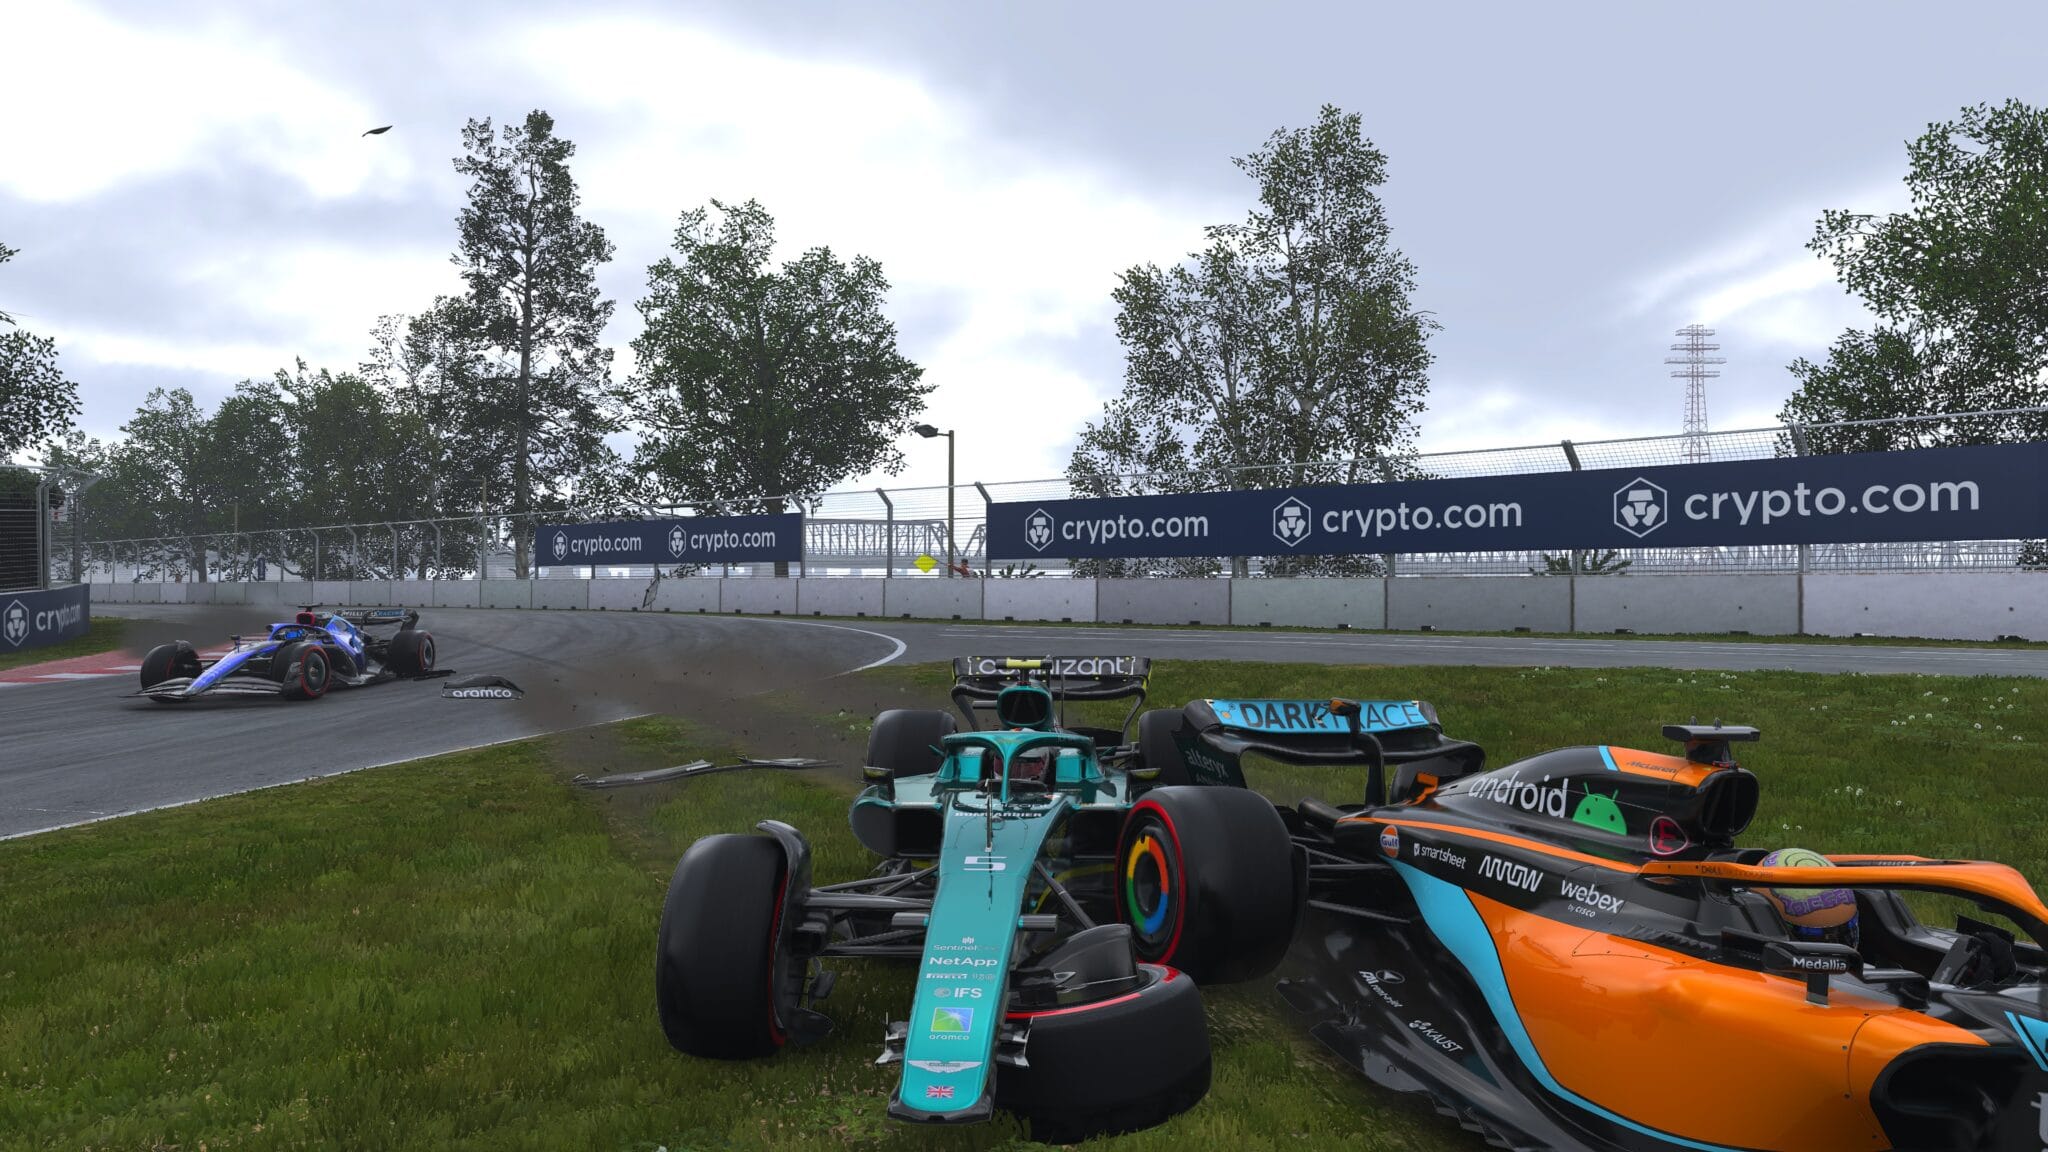 (Quickly run over the curbs on the inside? Better forget it. Experienced F1 racers will have to get used to the sensitive ground effect cars first).